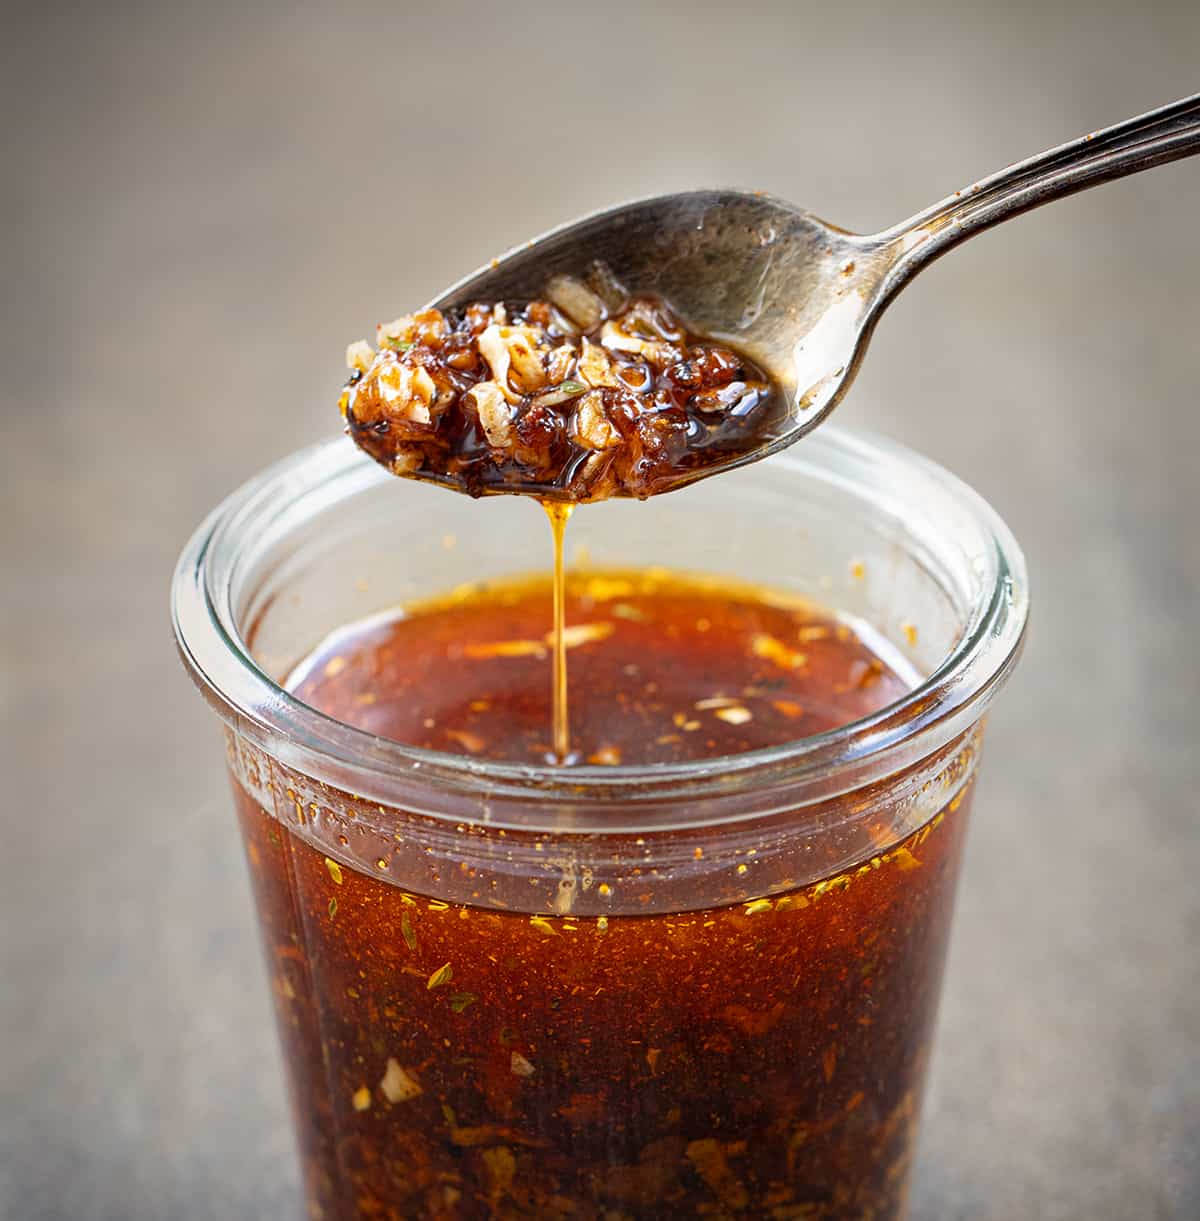 Spoon with Creole Garlic Chili Oil on It Above a Jar.